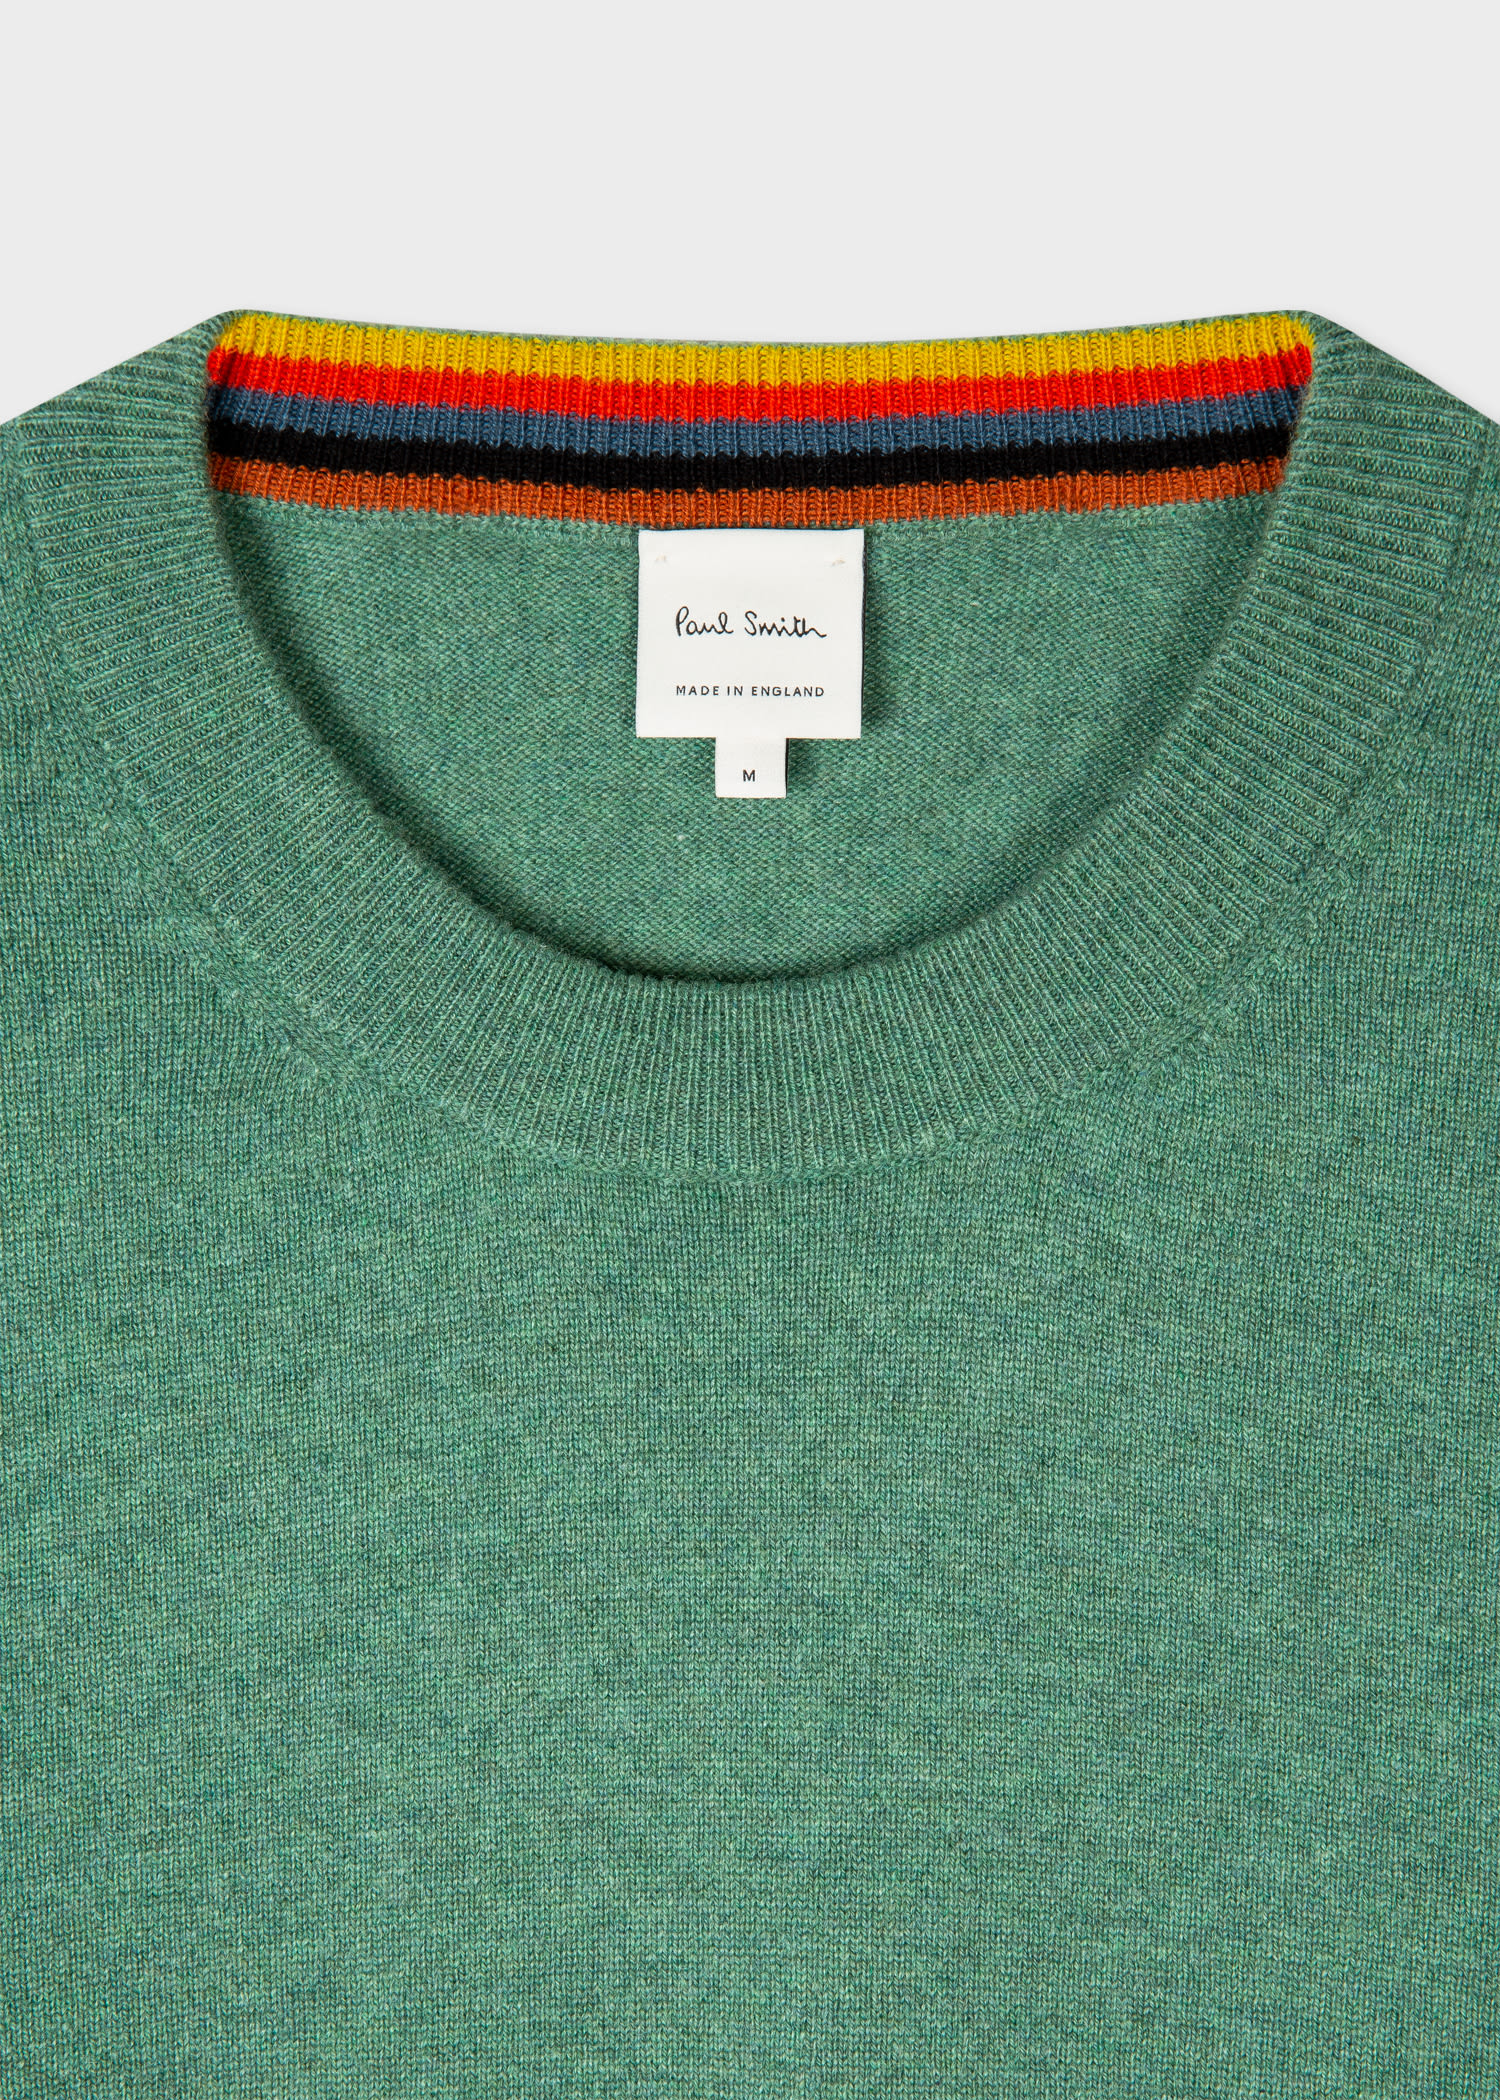 The Coziest Men's Cashmere Sweaters For Winter - HuffPost Life